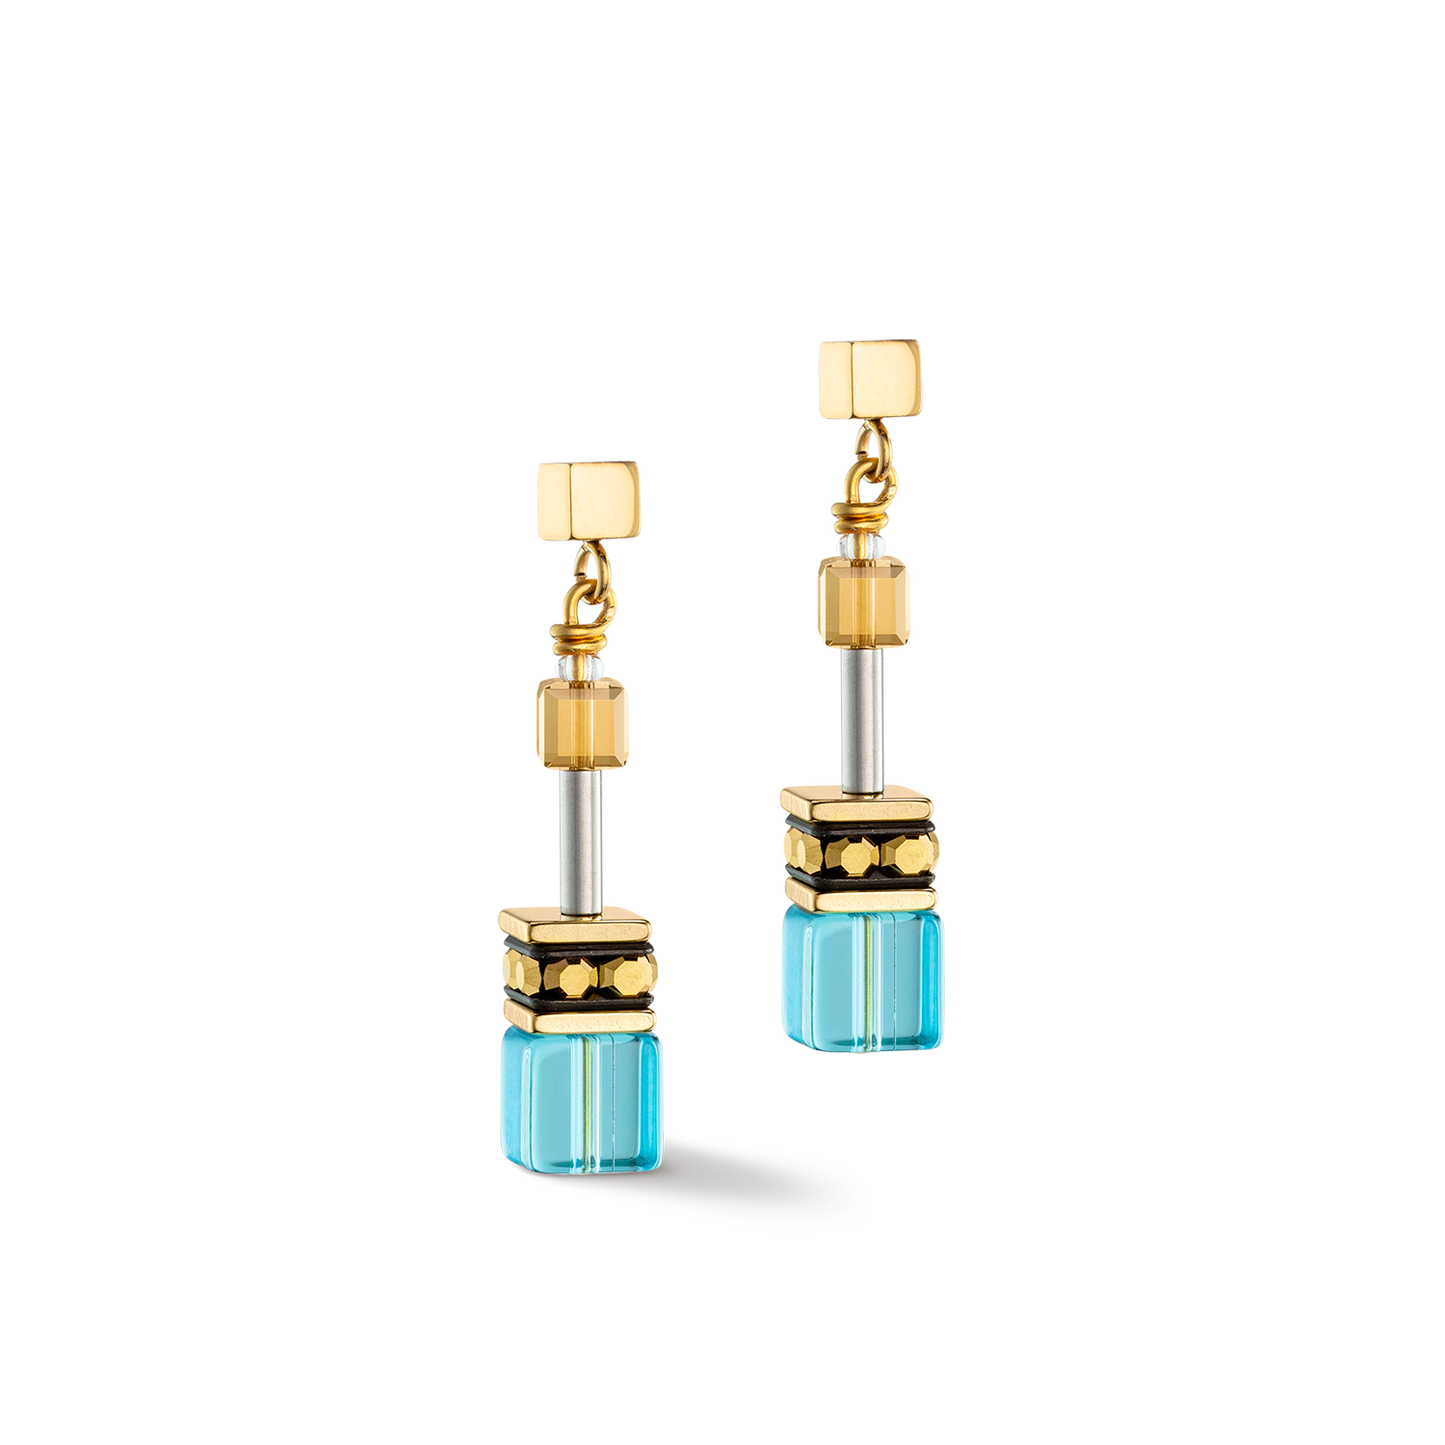 Cat Eye, Glass Cubes, Swarovski Crystals, Rhinestone Rondels, Gold Plated Sterling Silver Posts Earrings SPRING BLUE